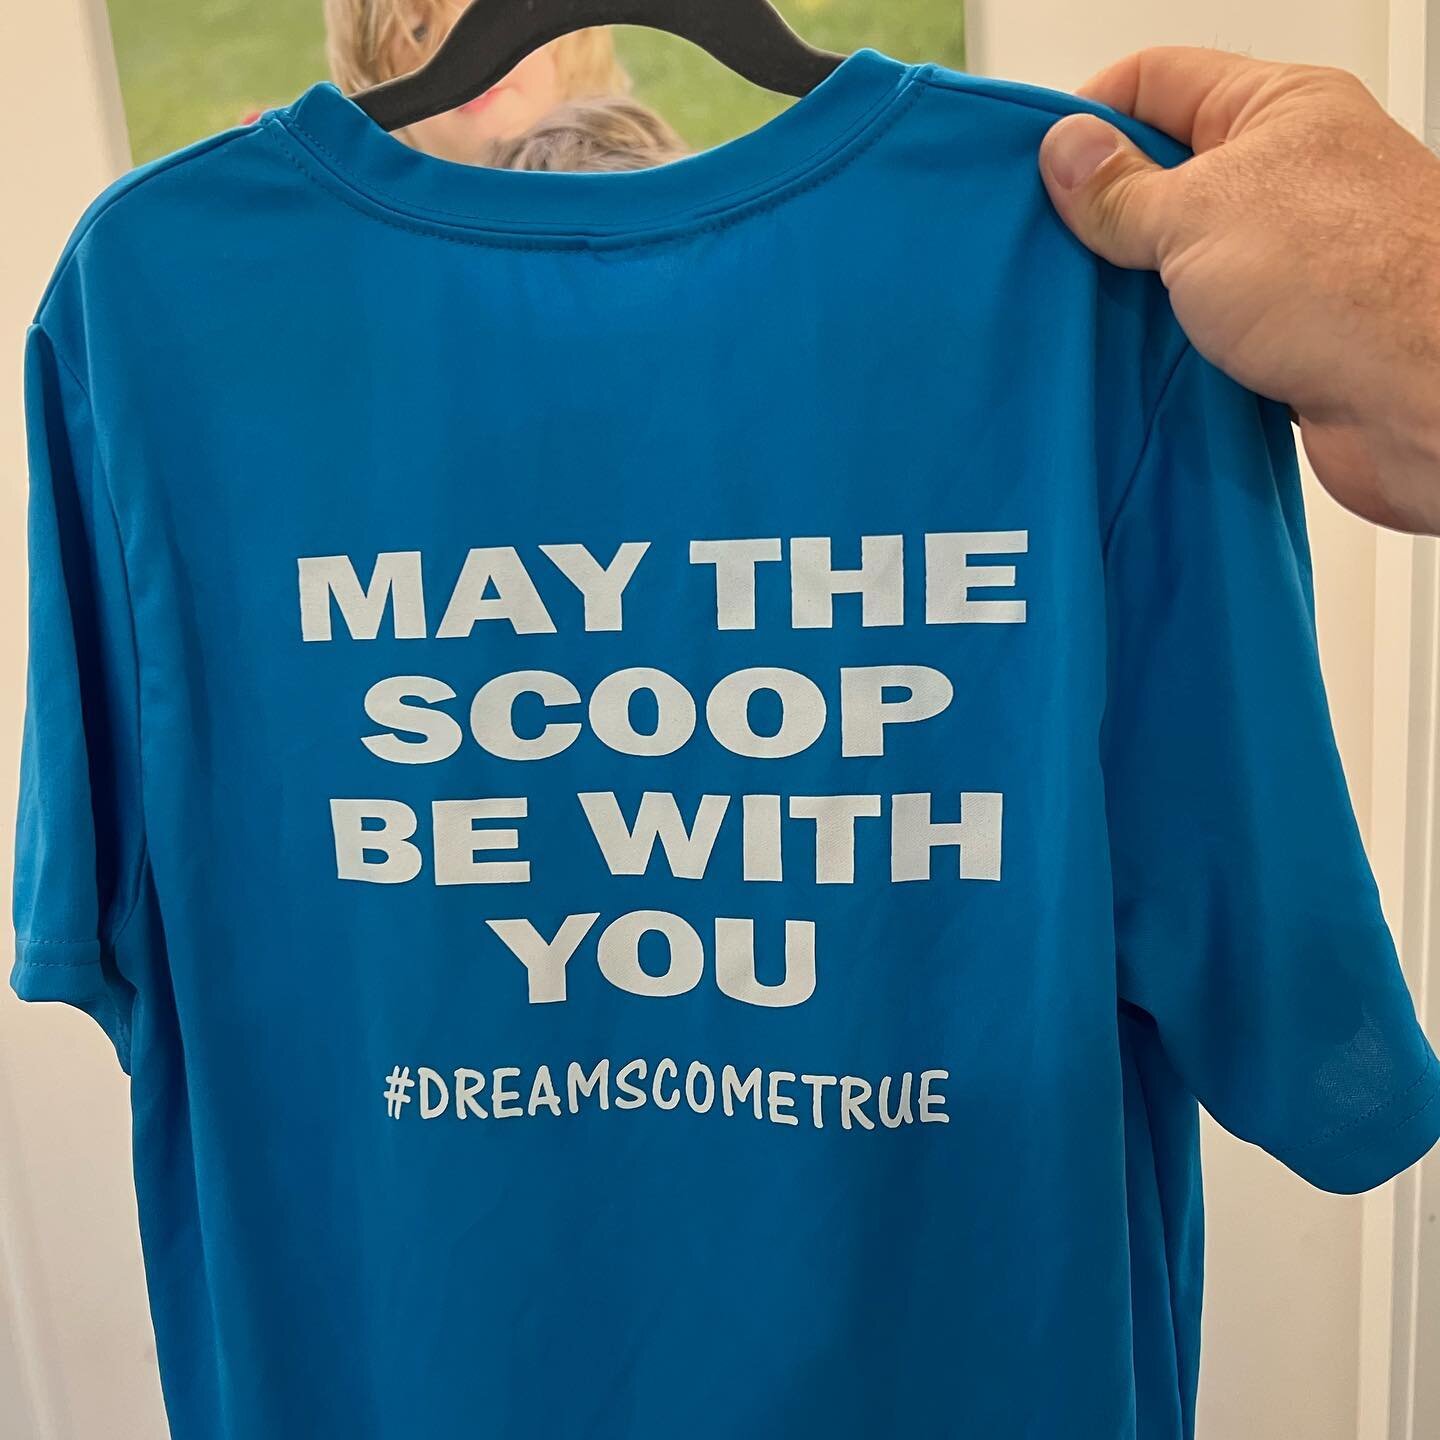 May The Scoop Be With You! 🥍💙

#starwars #maythe4thbewithyou #scoopthereitis